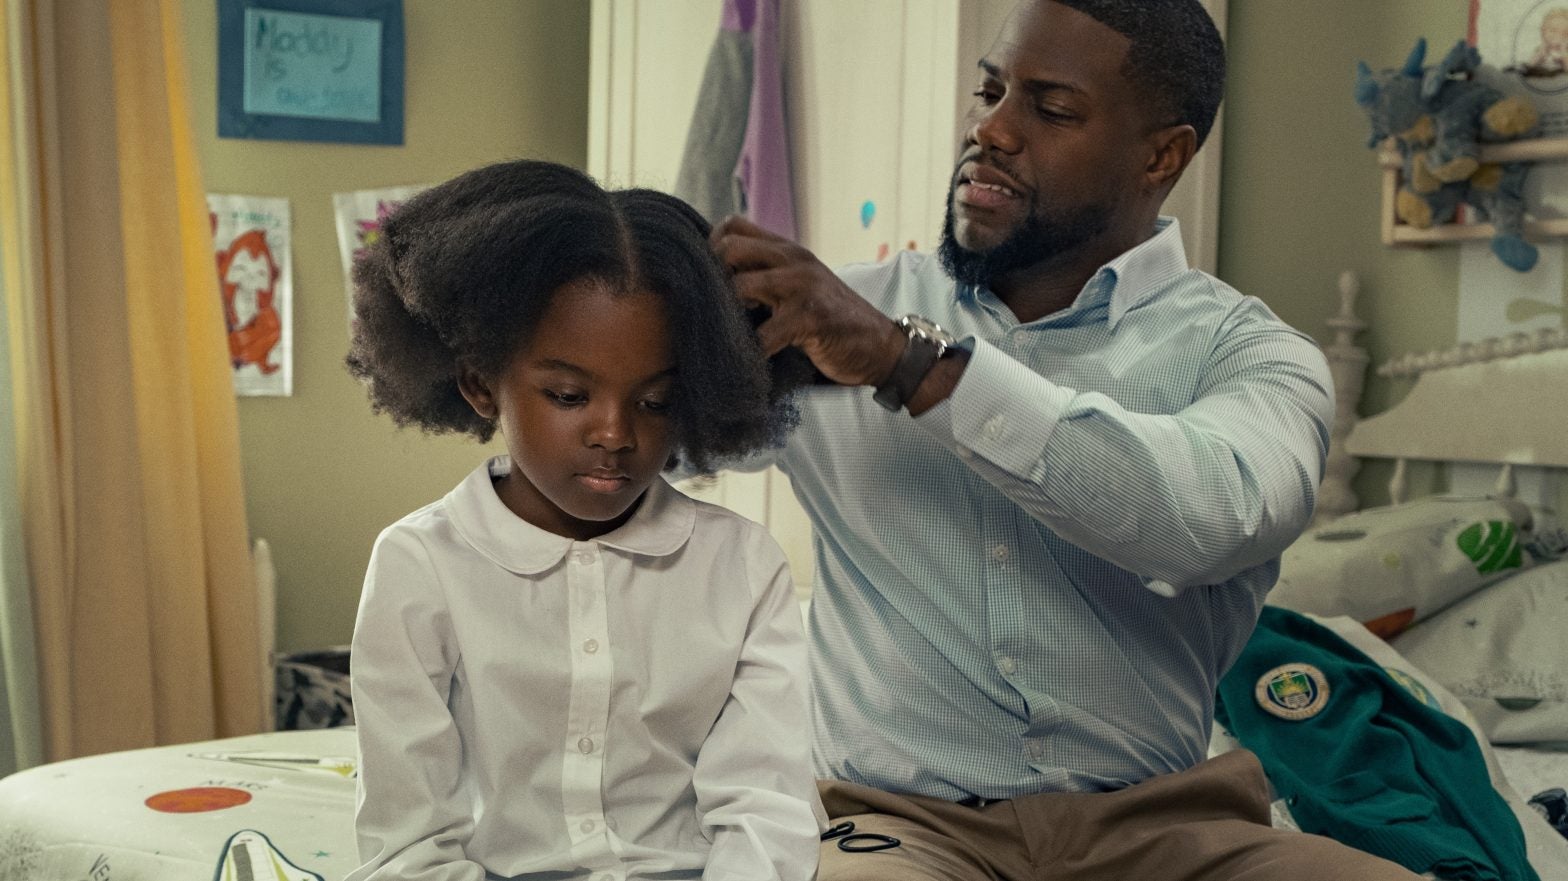 There Were Times I Just Didn't Know What To Do: Kevin Hart On Relating To The Struggle Of Single Fatherhood